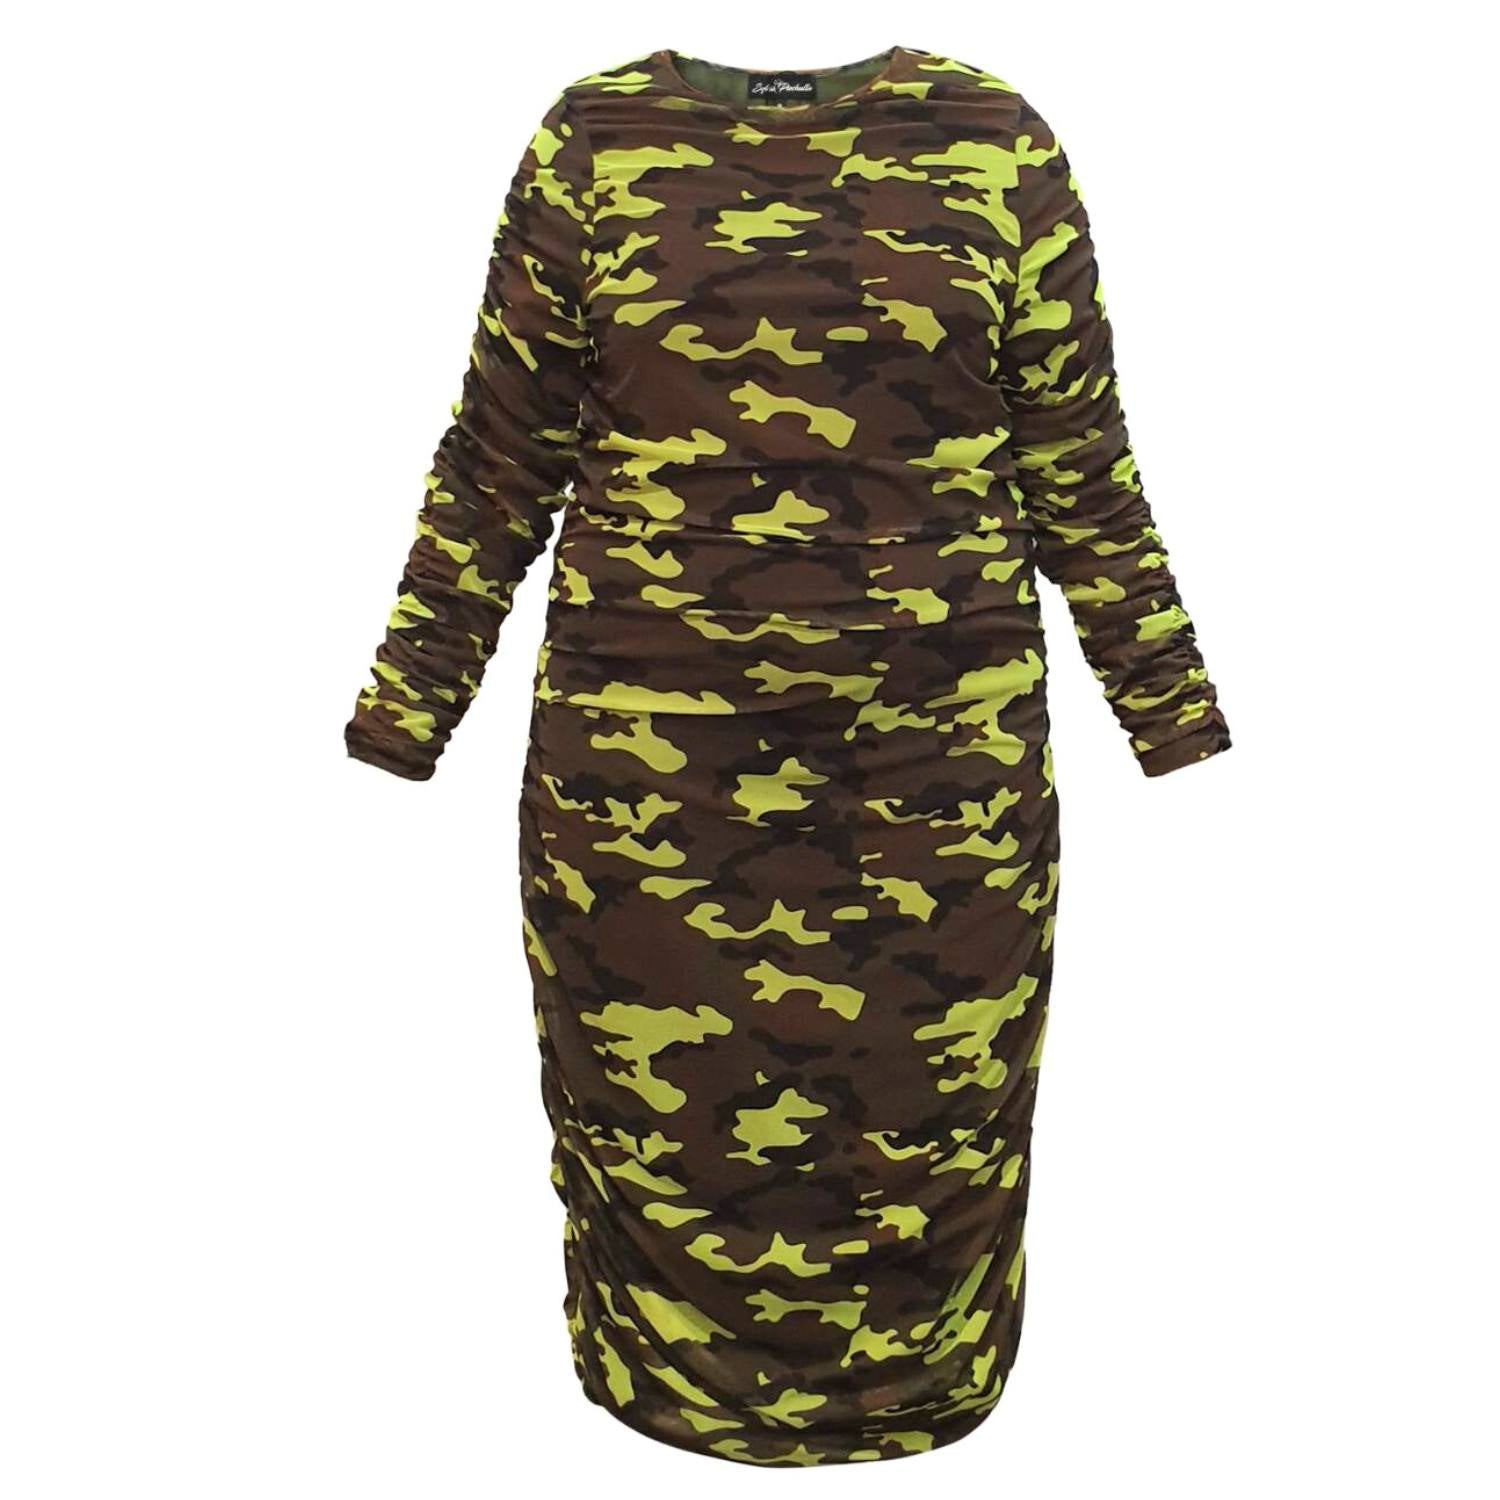 Women's Plus Size Neon Lime Camouflage Bodycon Midi Dress displayed as a cutout on an invisible mannequin.